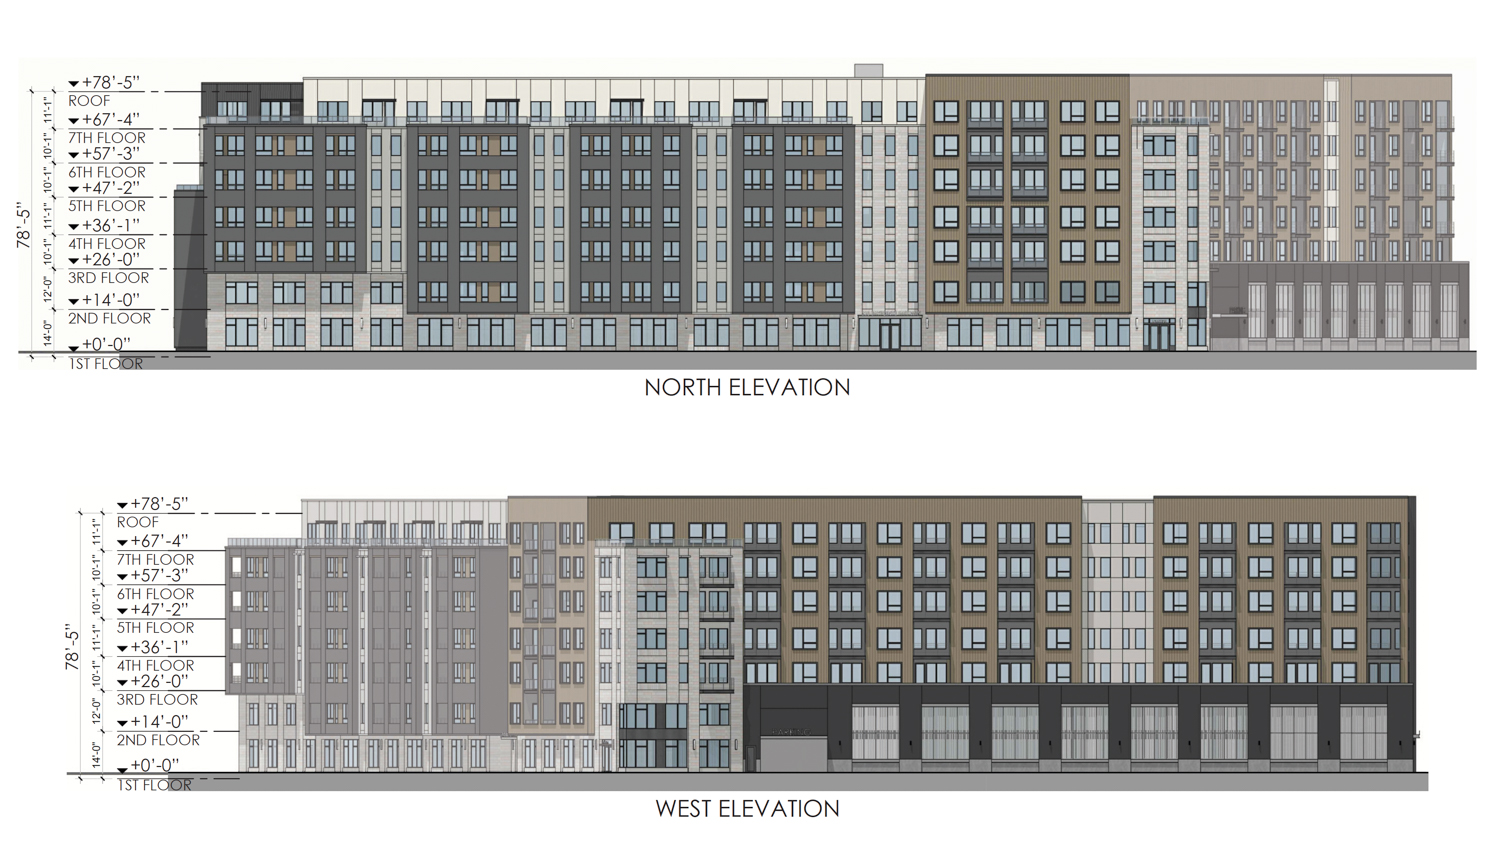 Baypointe Residential Development apartment elevations, illustration by KTGY